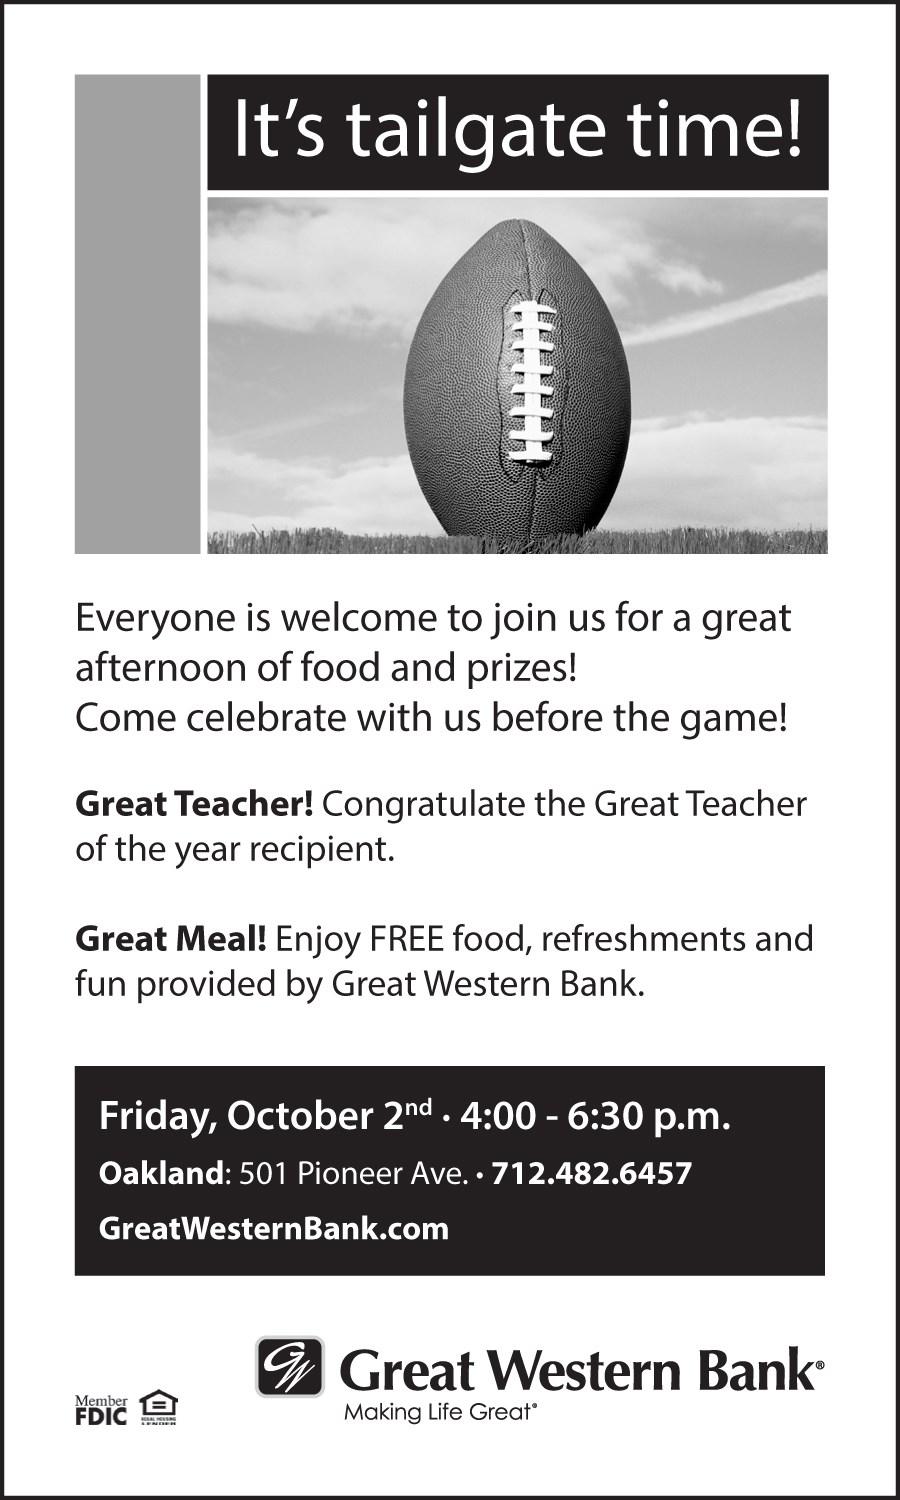 DON T FORGET TO JOIN THE RIVERSIDE BOOSTER CLUBS Single Membership $15 Couple Membership $25 Gold Membership $50 Great Western Bank will be having their annual Homecoming Tailgate on Friday, October